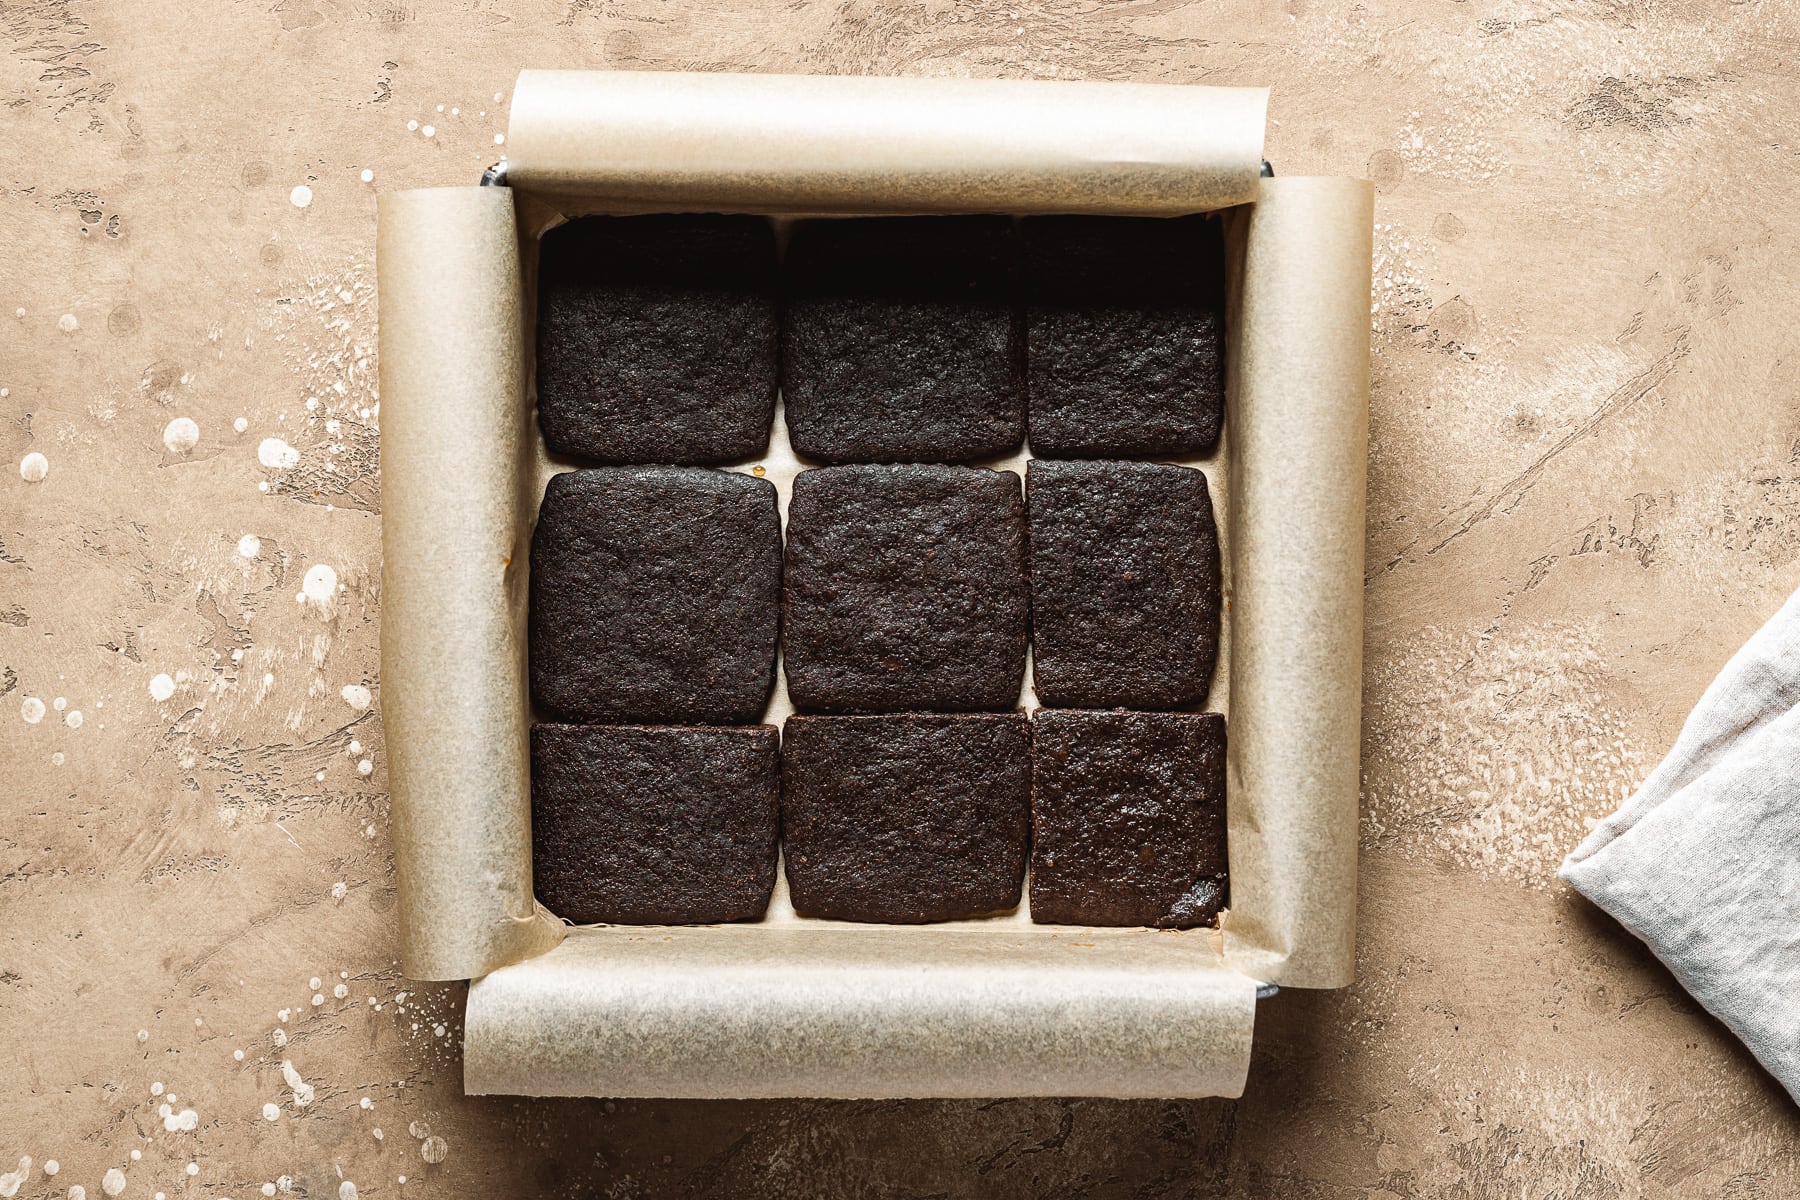 A recipe process photo showing a layer of chocolate wafer cookies in a square pan. The pan sits on a tan textured stone surface.